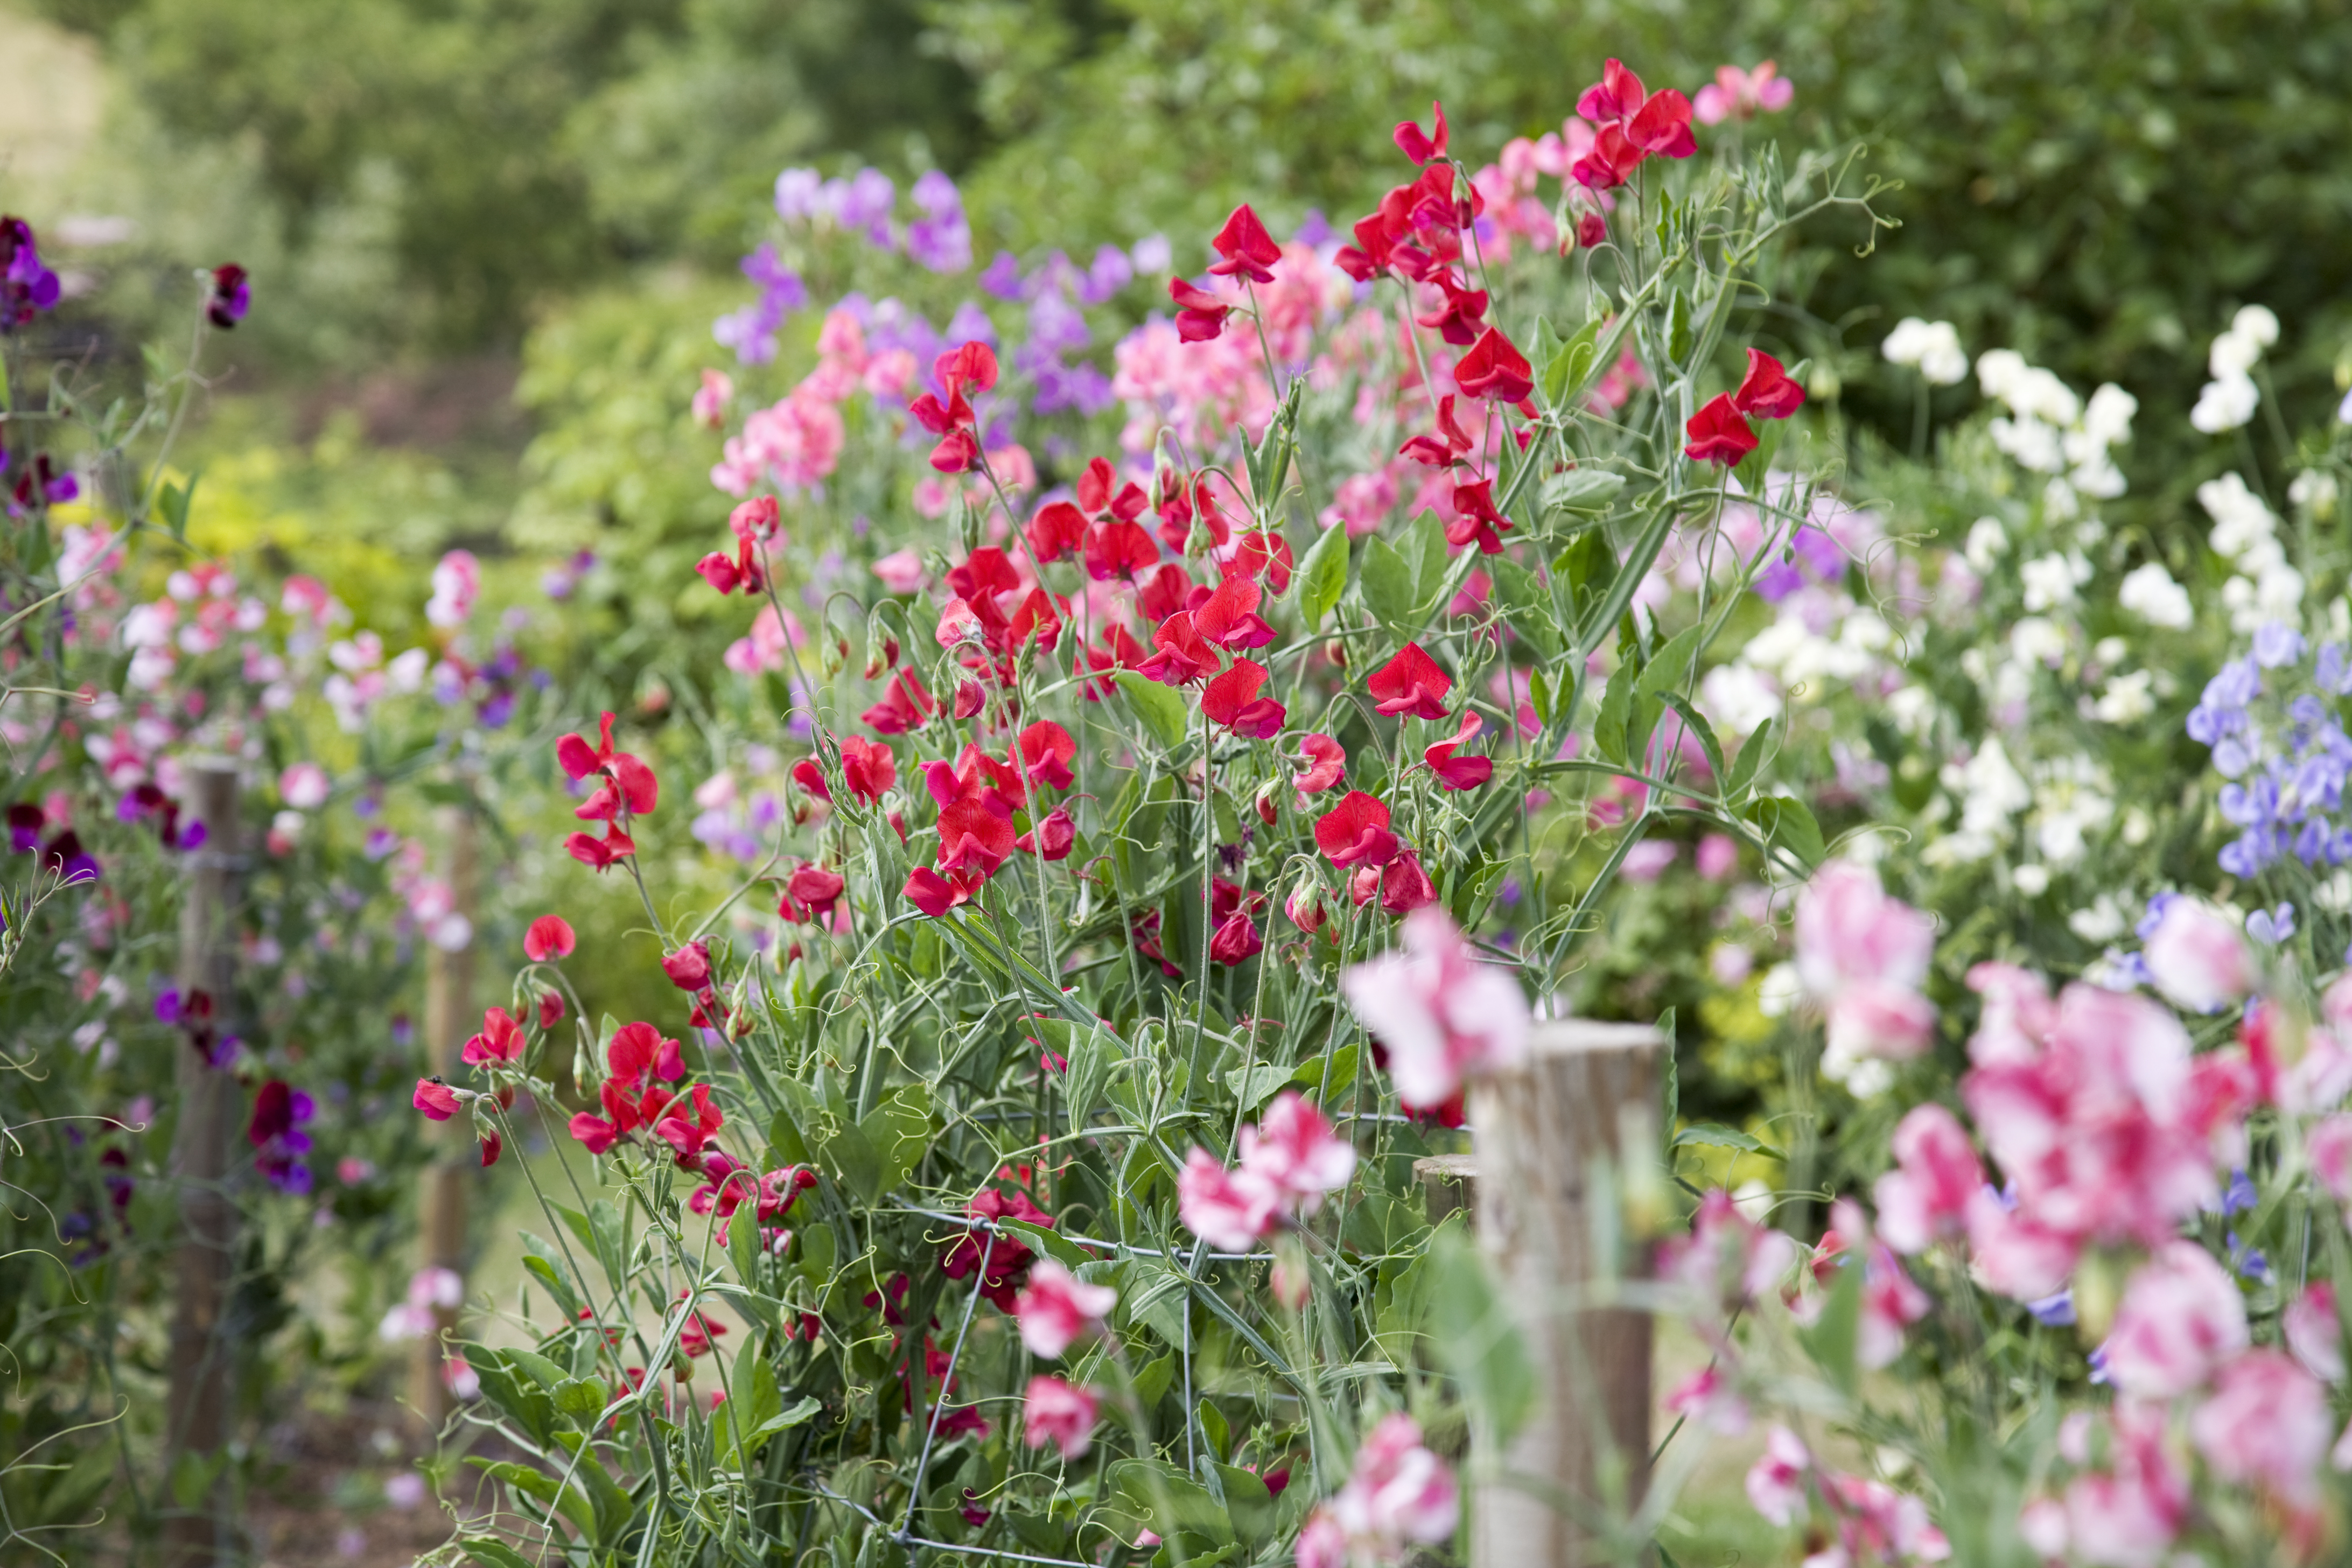 A row of colorful sweet peas